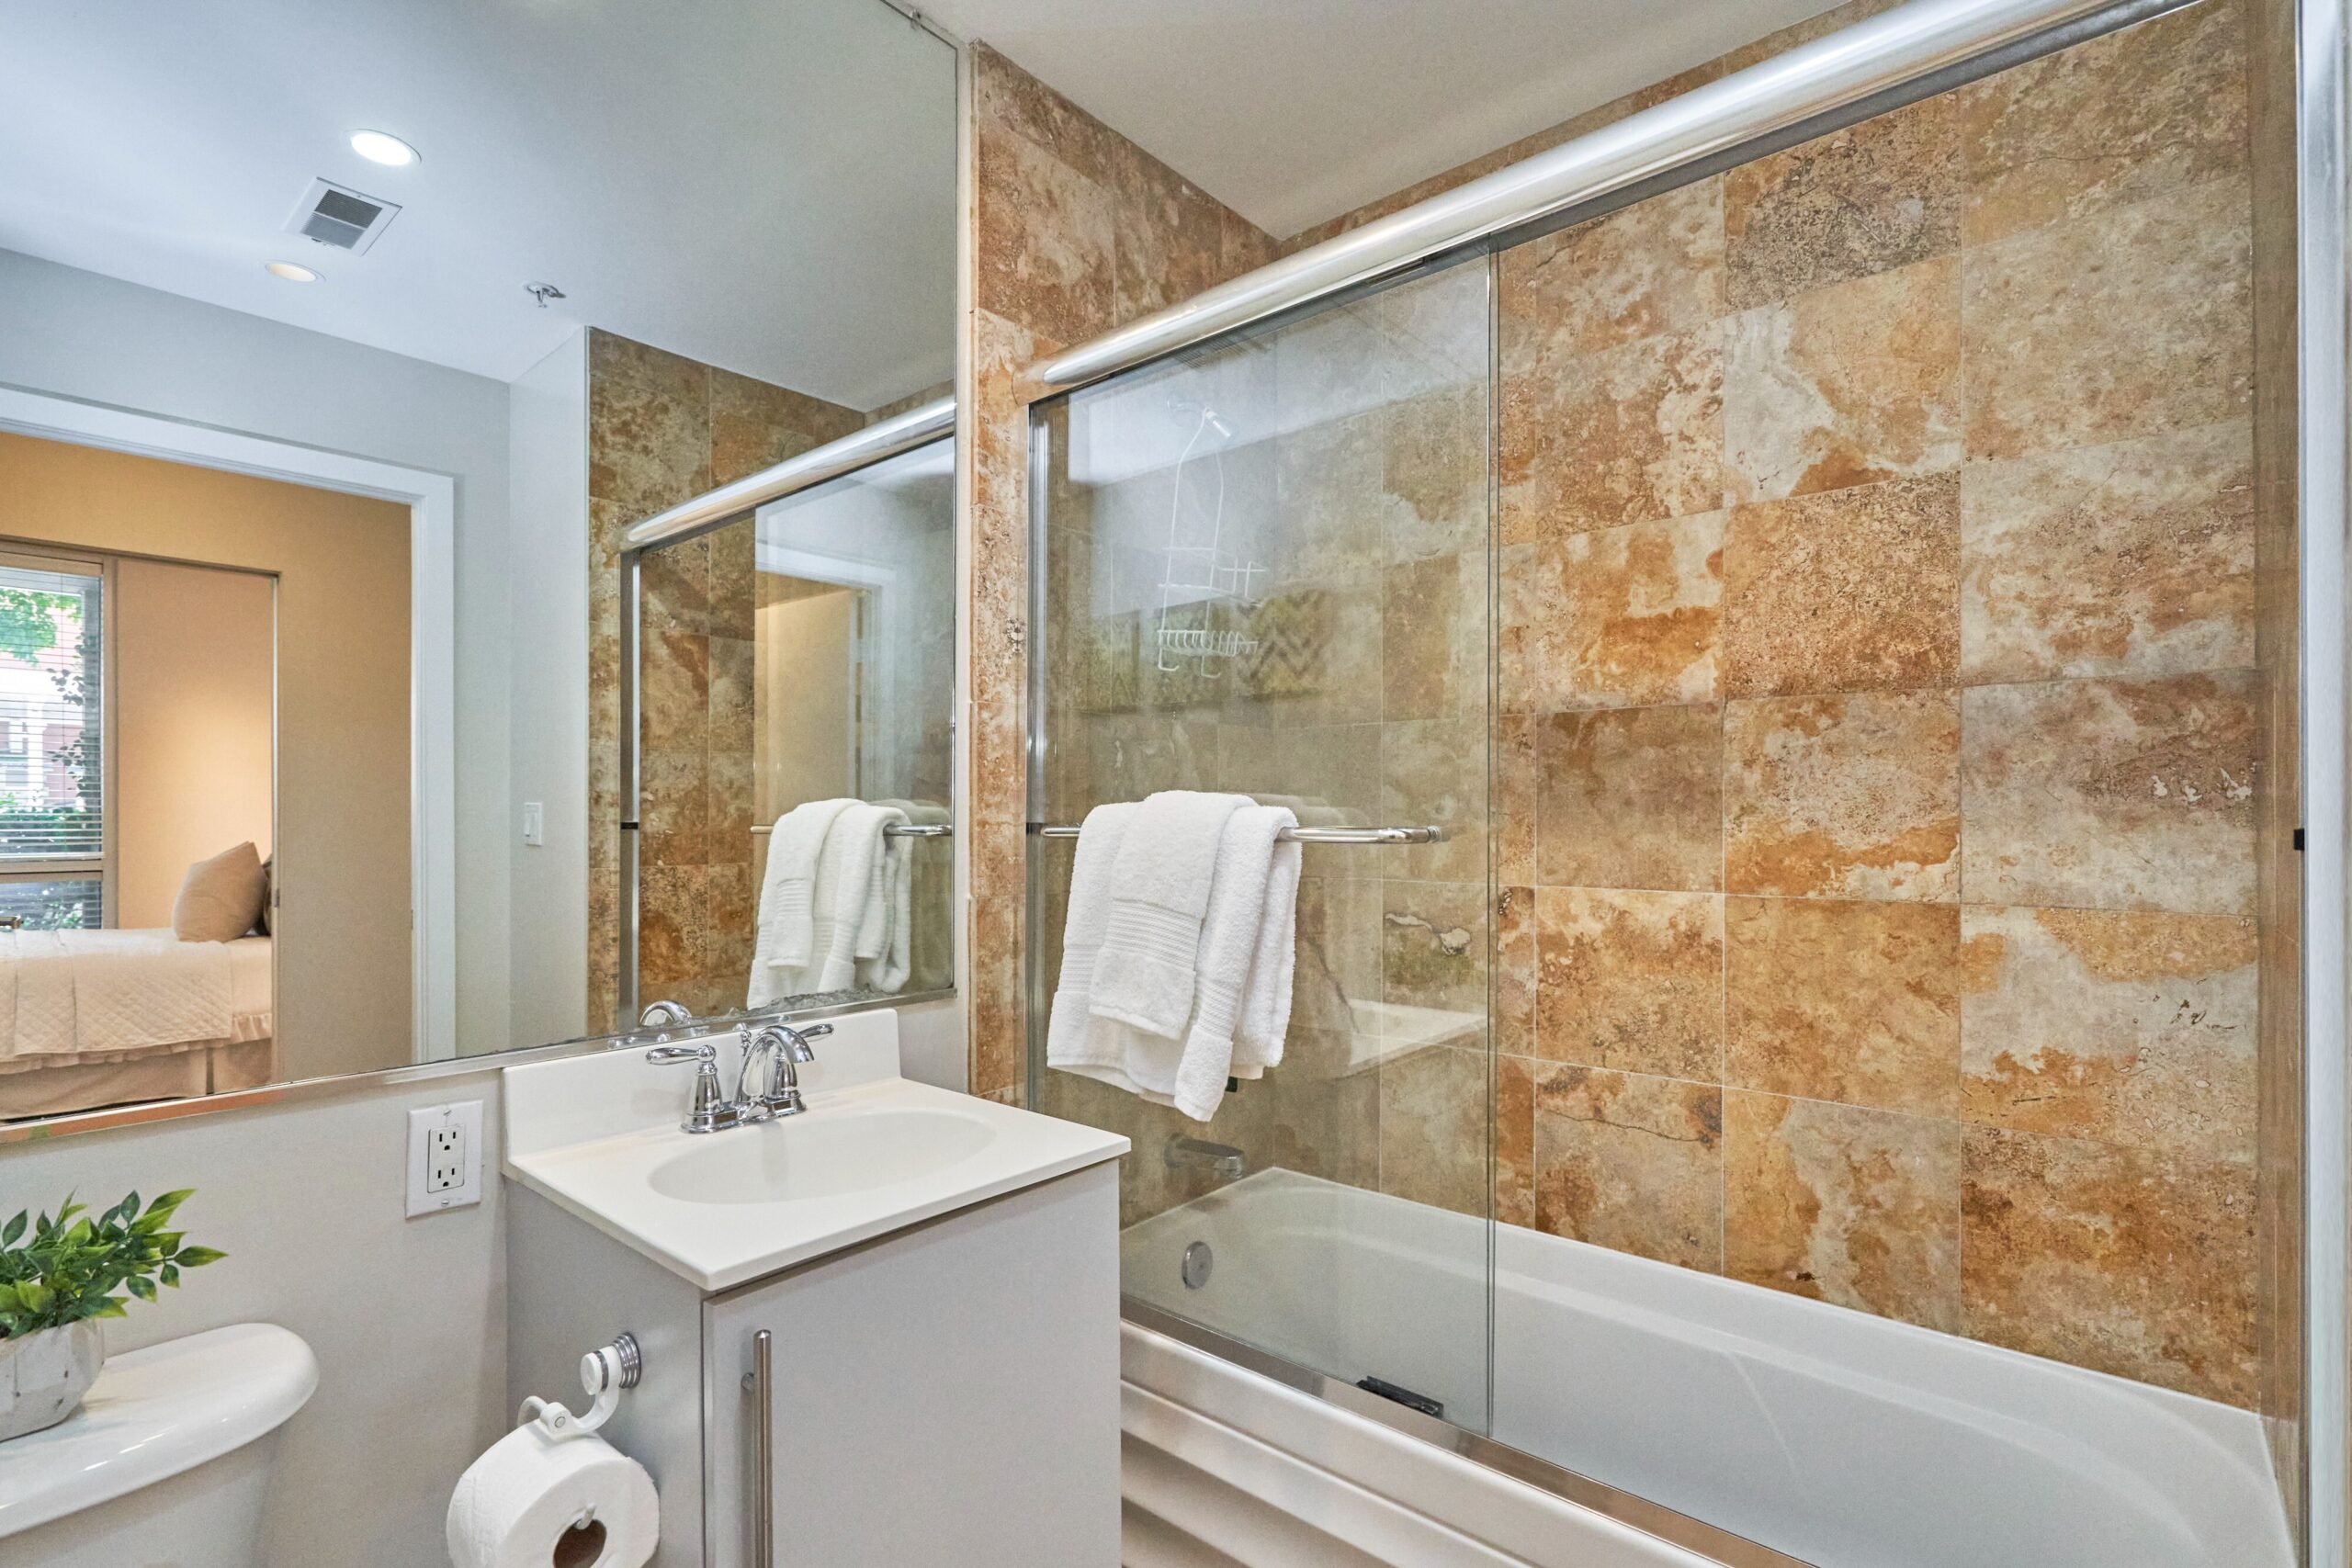 Professional interior photo of 1300 13th St NW #102, Washington DC - showing the primary bathroom with ceramic tiled walls over glass-enclosed bathtub